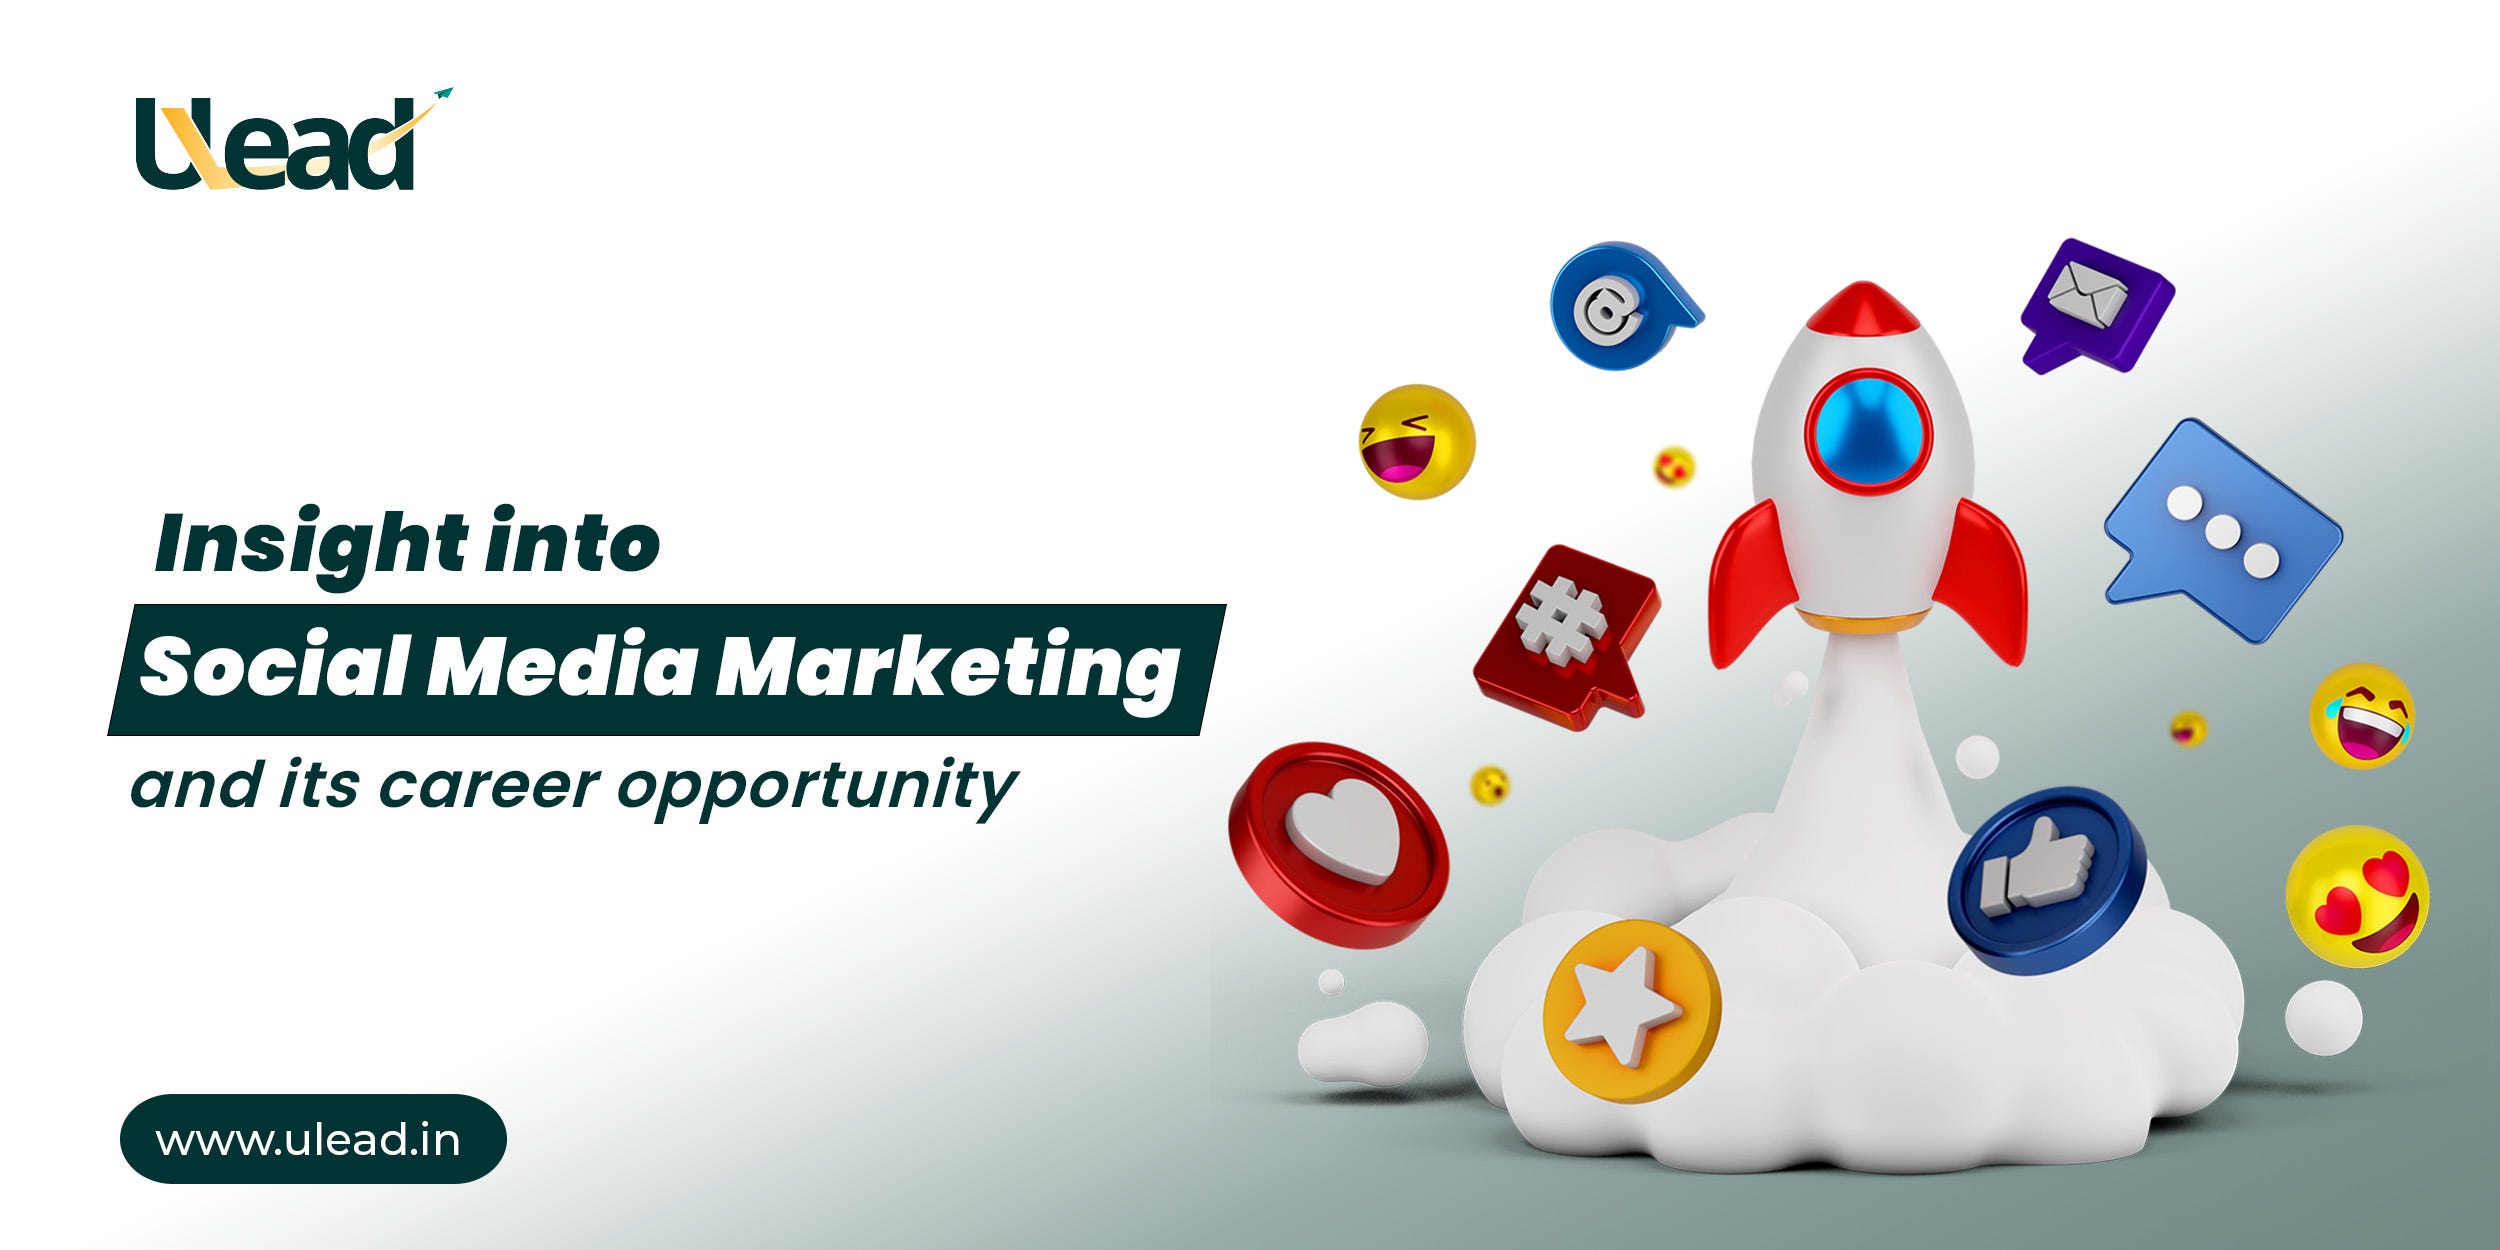 Insight into Social Media Marketing and it’s career opportunities